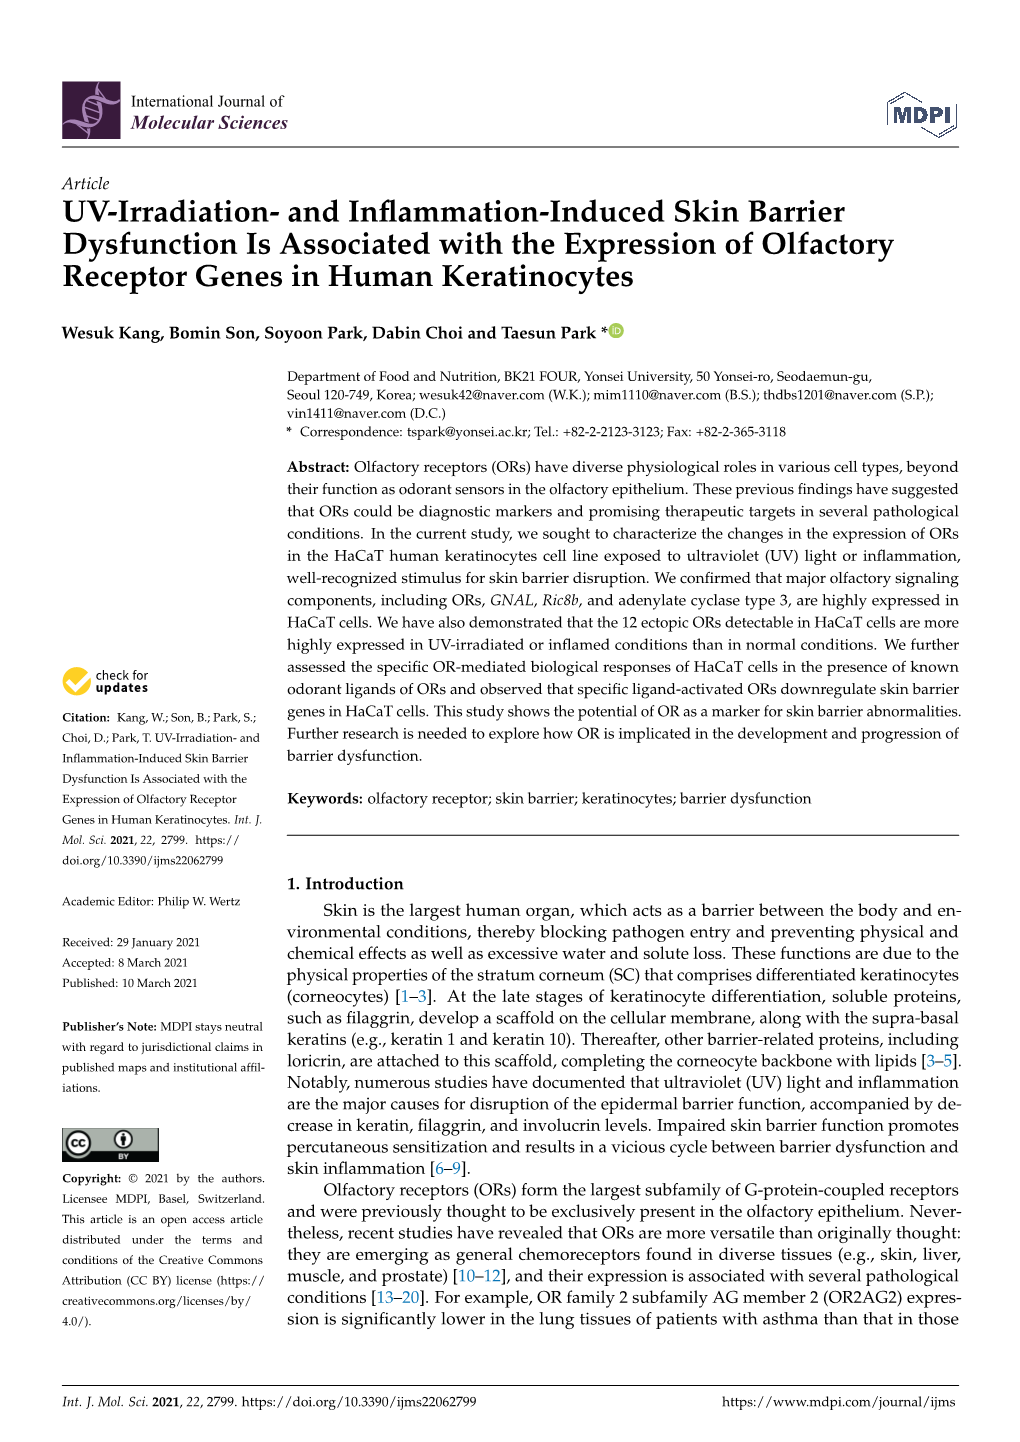 UV-Irradiation- and Inflammation-Induced Skin Barrier Dysfunction Is Associated with the Expression of Olfactory Receptor Genes